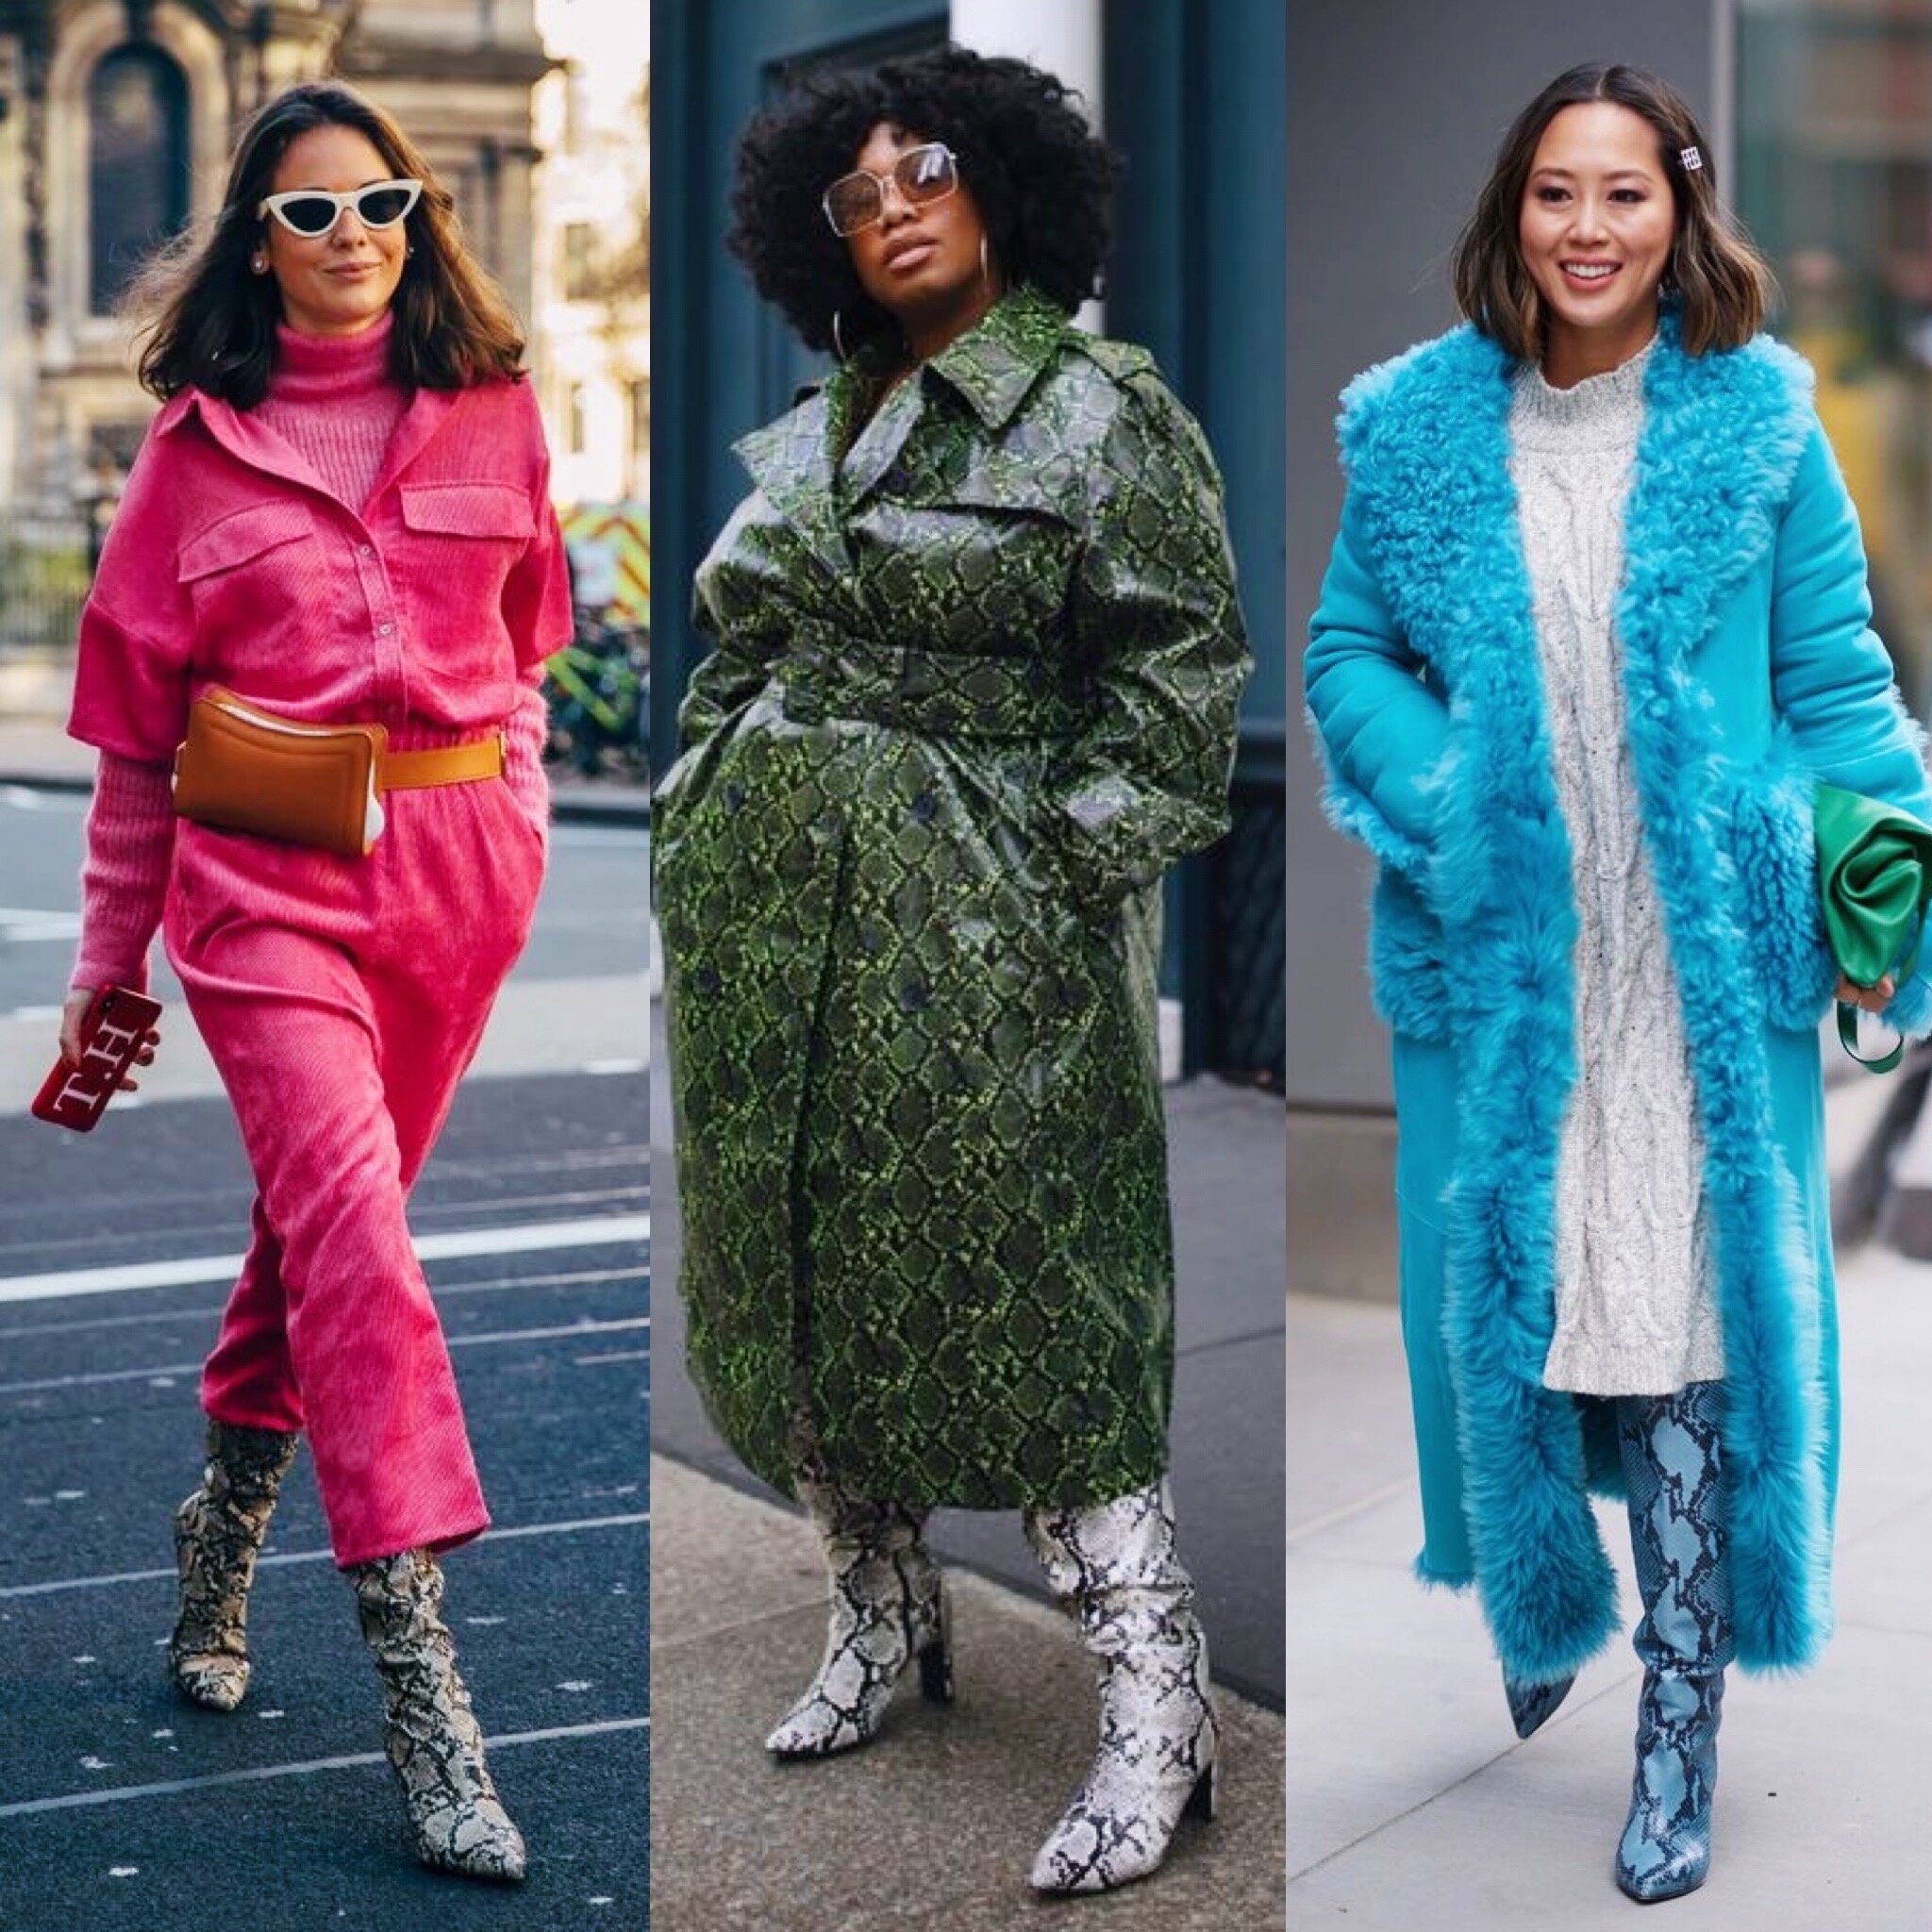  If you’ve been following along, you know I’ve been loving the animal print/skin trend for the past year so it’s no surprise I adore snakeskin boots! You can use them as a statement piece to add some pop to a monochromatic look or as an accent to an 